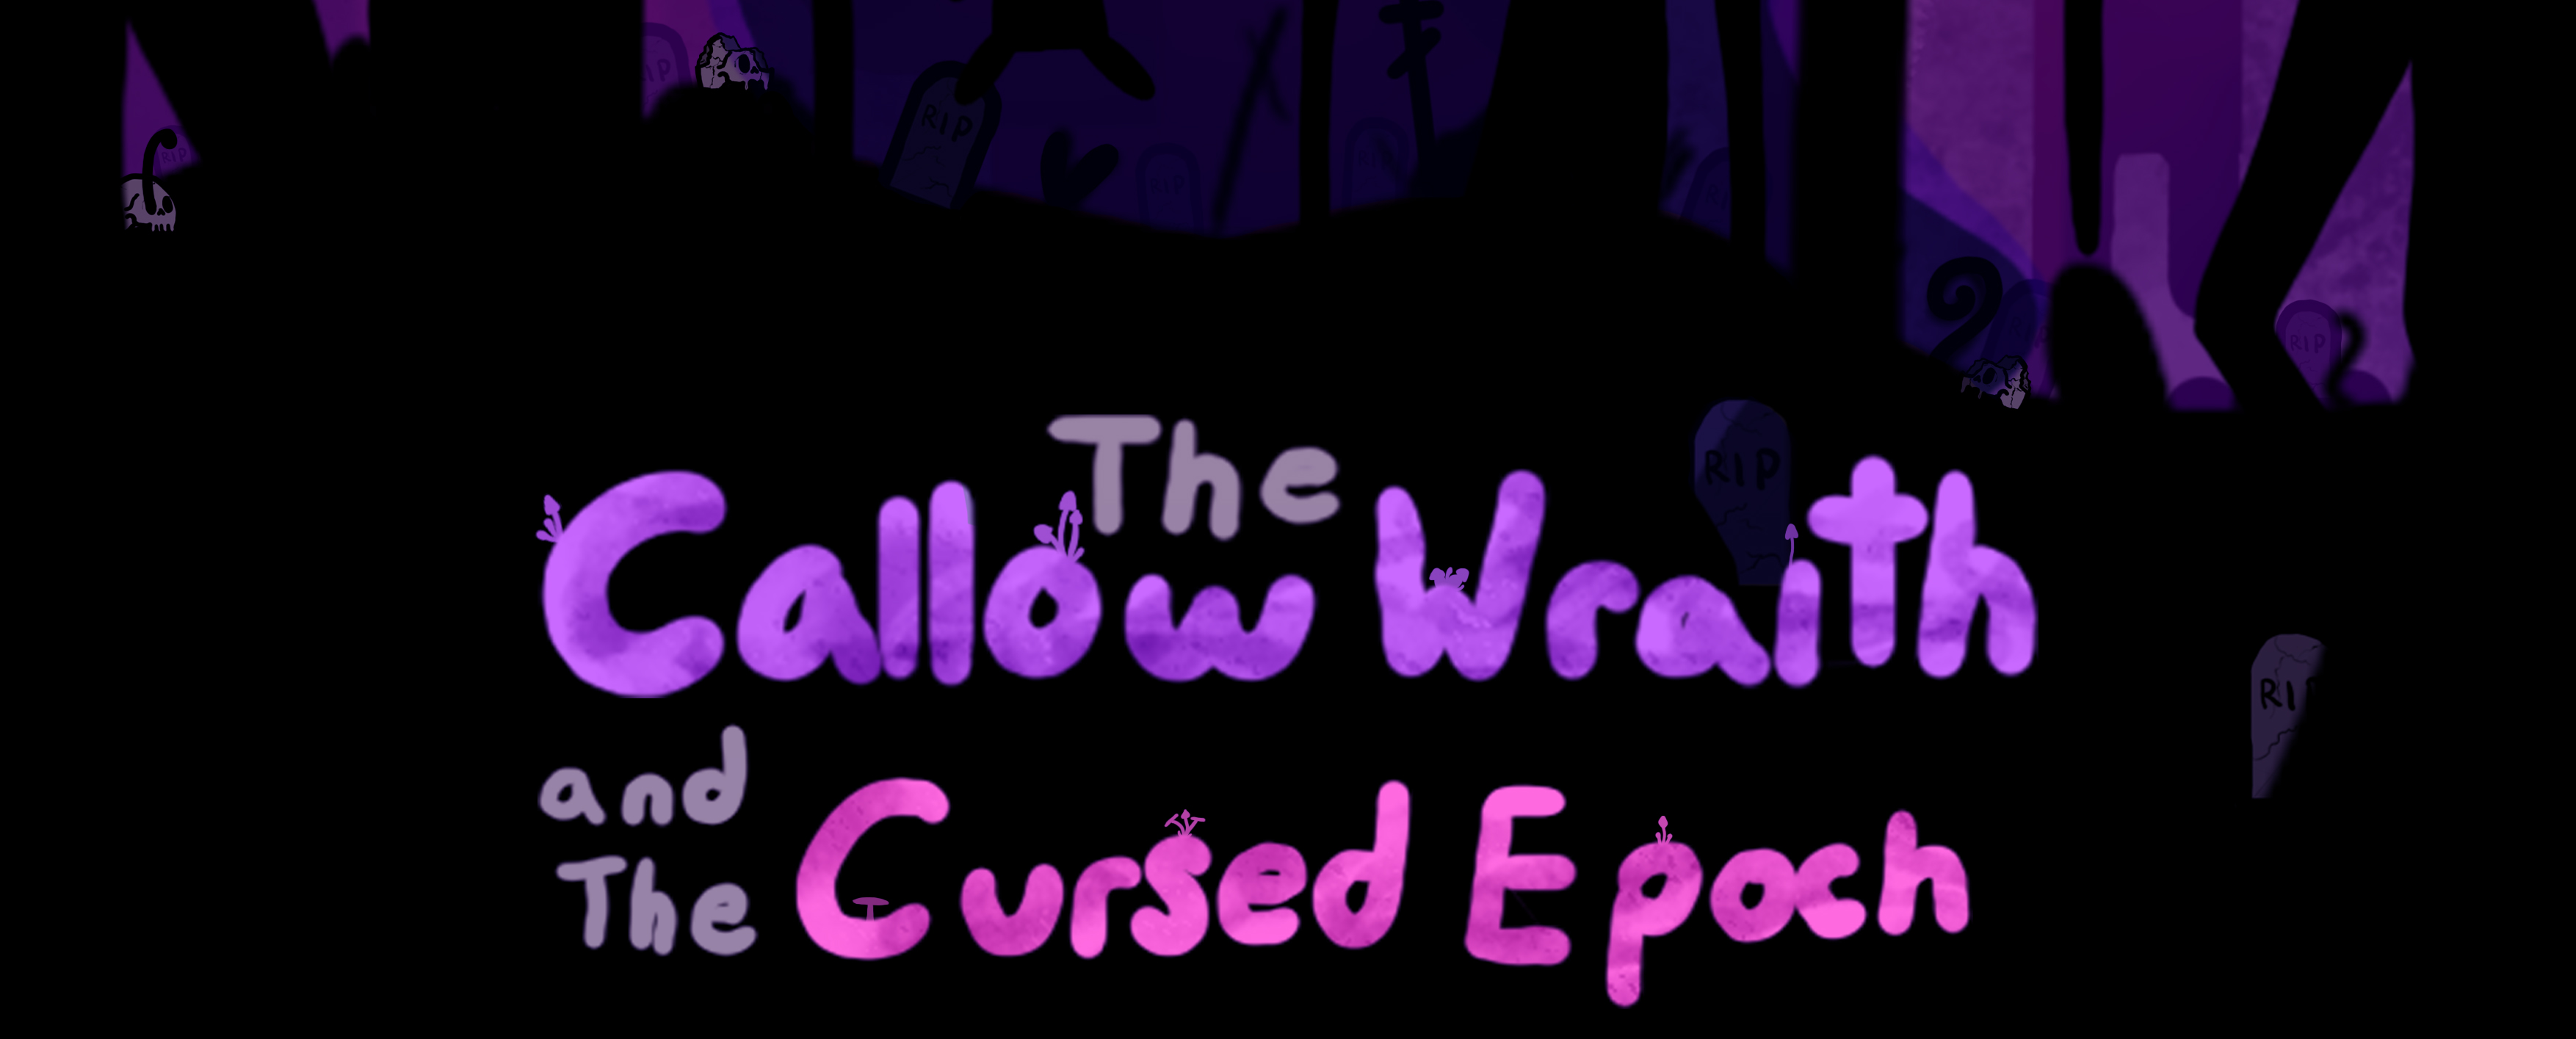 The Callow Wraith and the Cursed Epoch